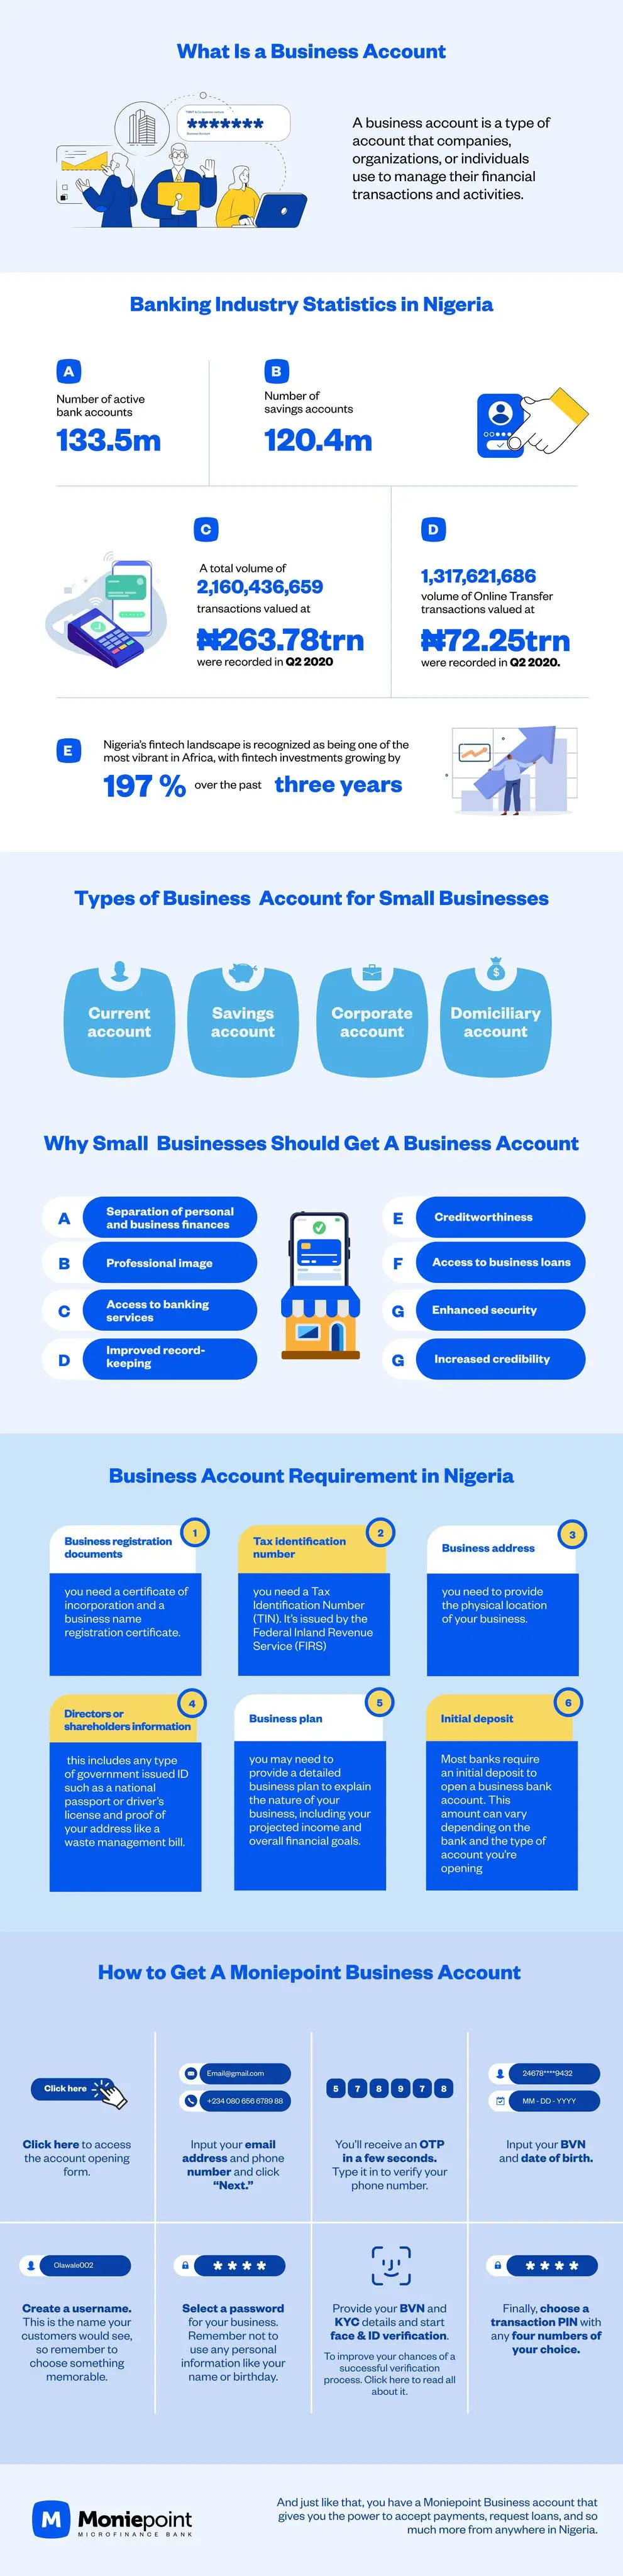 What is a Business Account and Why Your Small Business Needs One